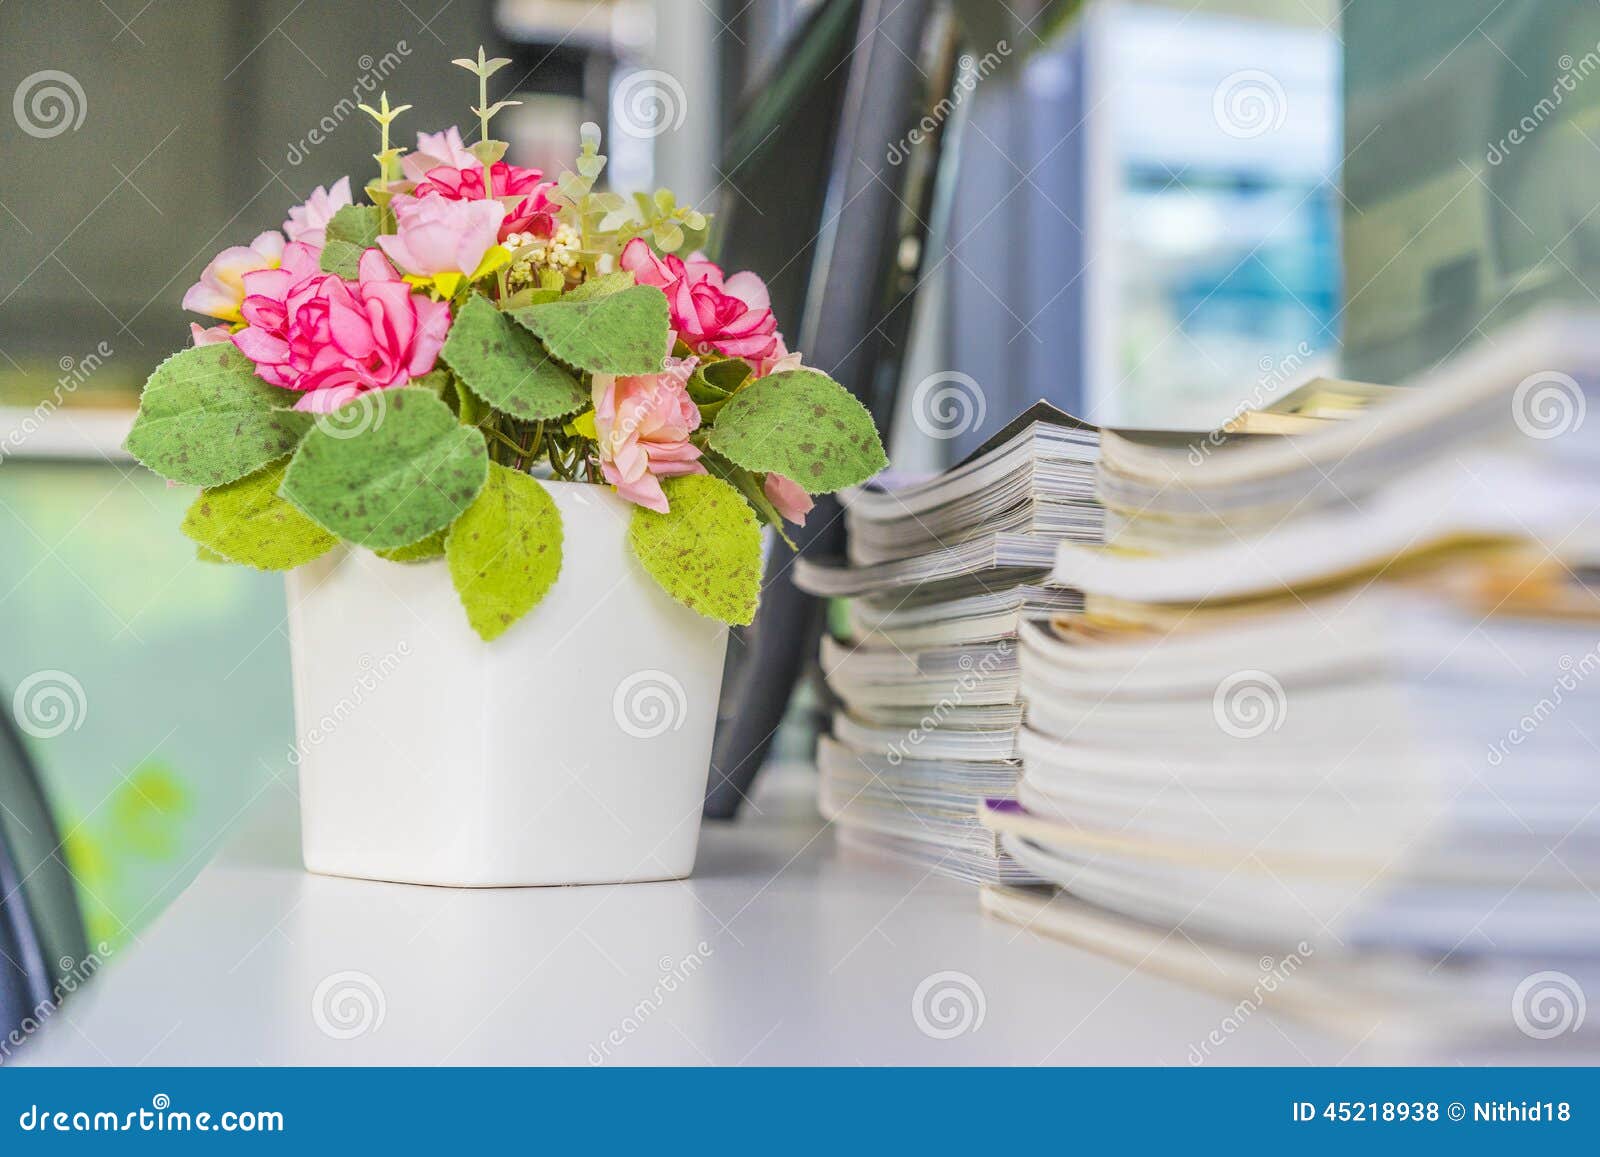 Artificial Flowers Stock Photo Image Of Interior Domestic 45218938